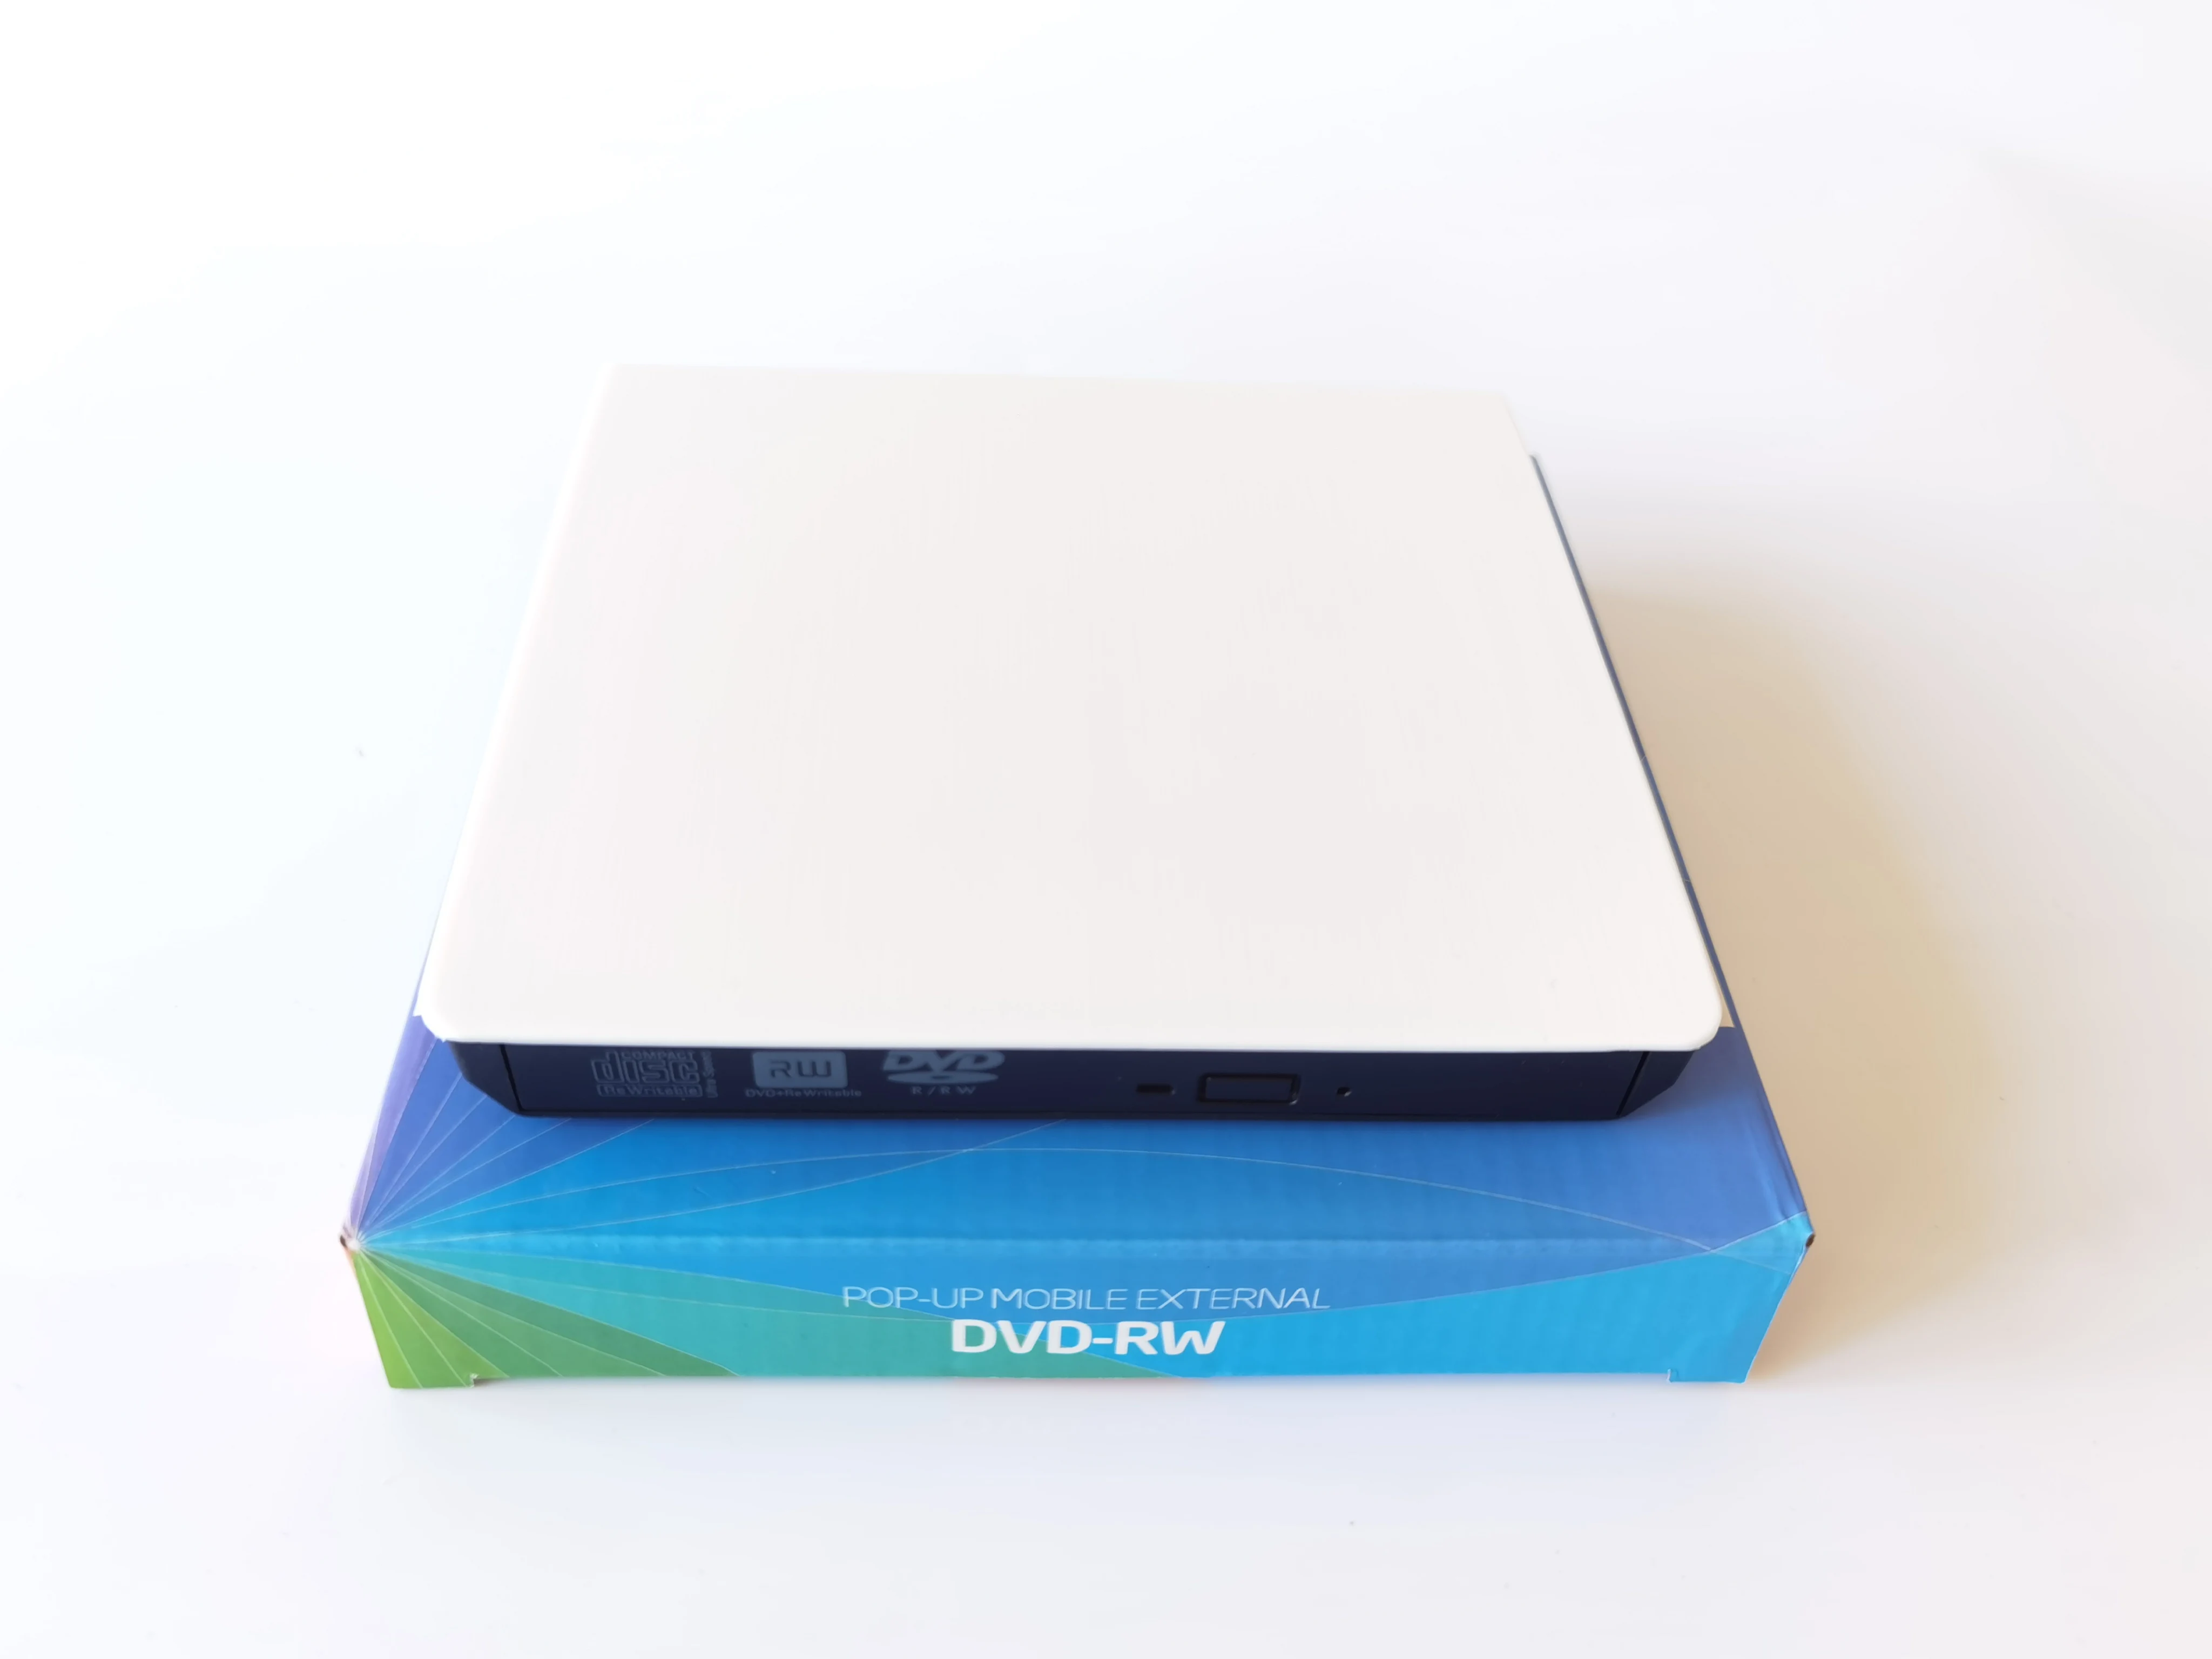 New ultra thin external optical drive USB 3.0 DVD combination DVD ROM player DVD ROM plug and play for MacBook laptop desktop enlarge